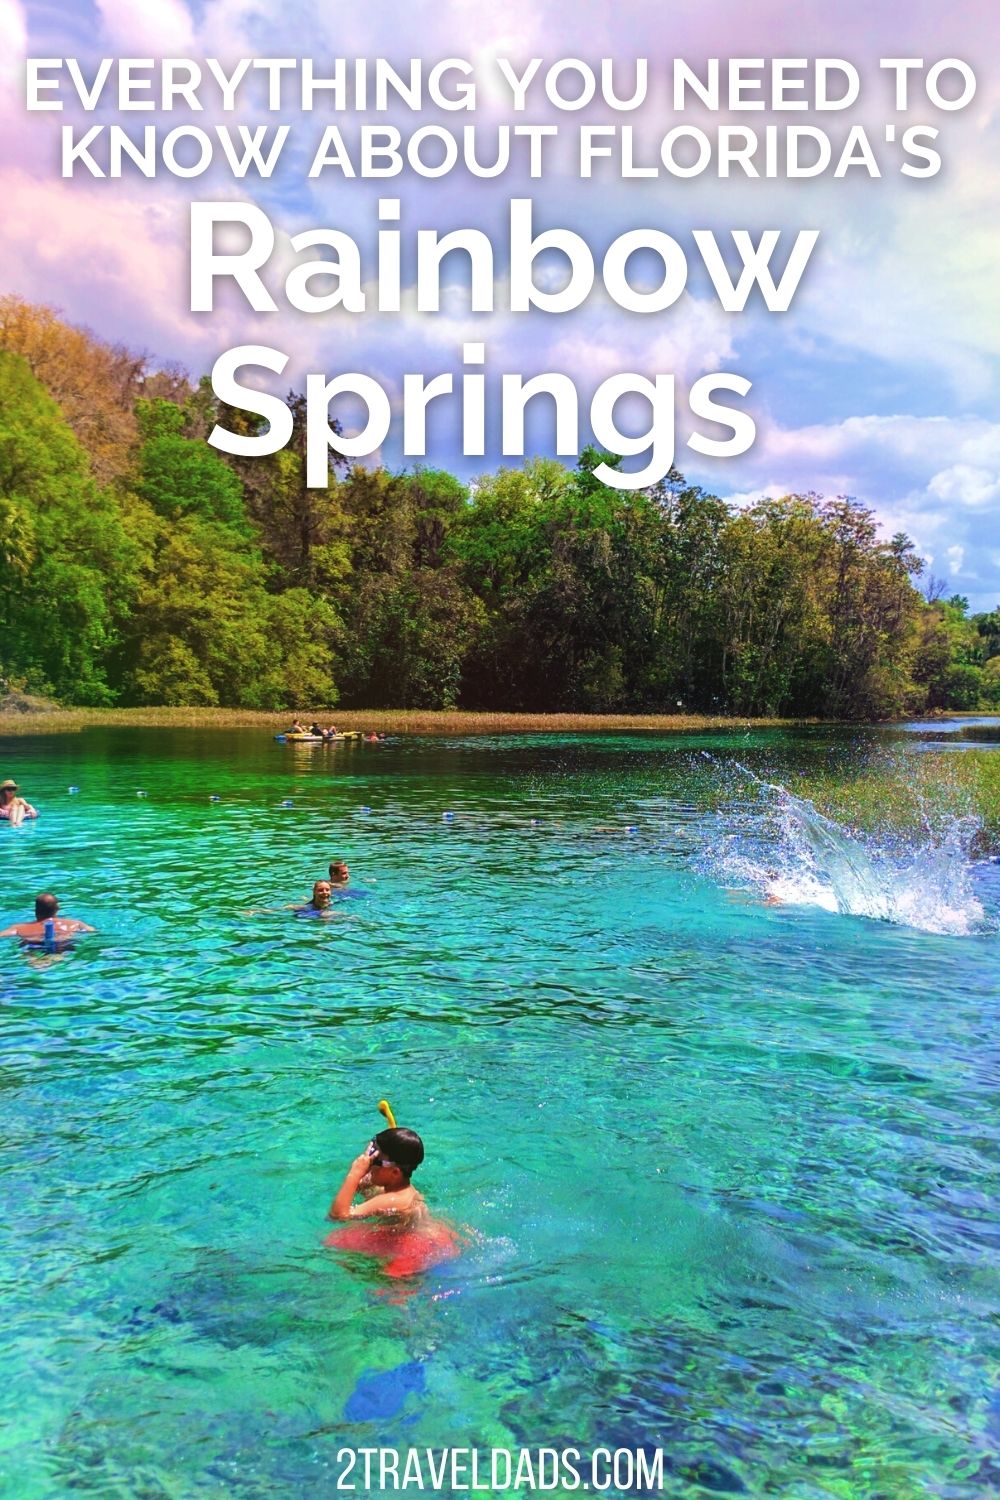 Rainbow Springs State Park is one of the prettiest places in Florida. Everything you need to know for planning a visit, including kayaking, swimming, trails and more. Perfect Gulf Coast spring destination!